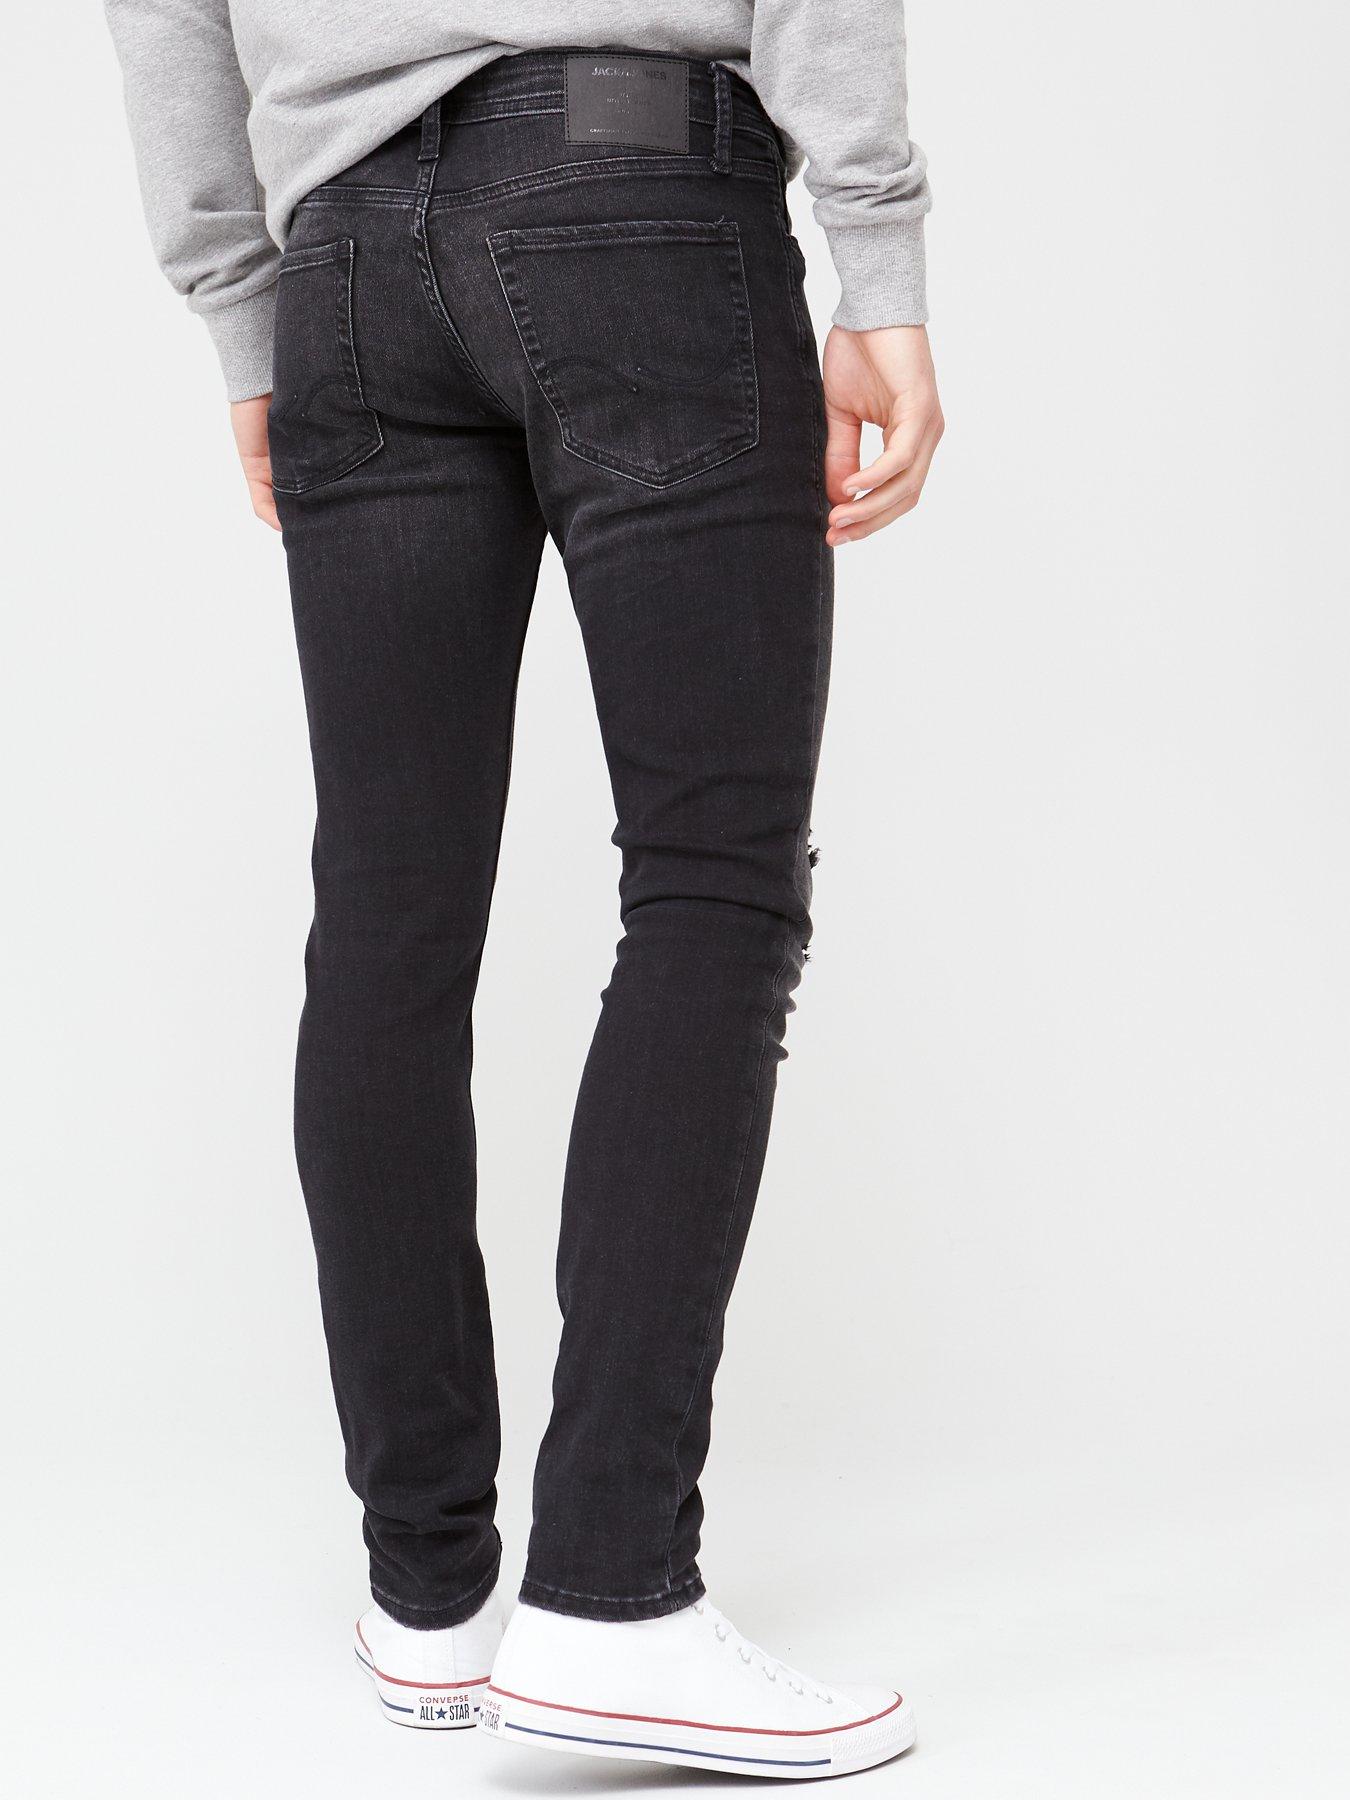 jack and jones black ripped jeans